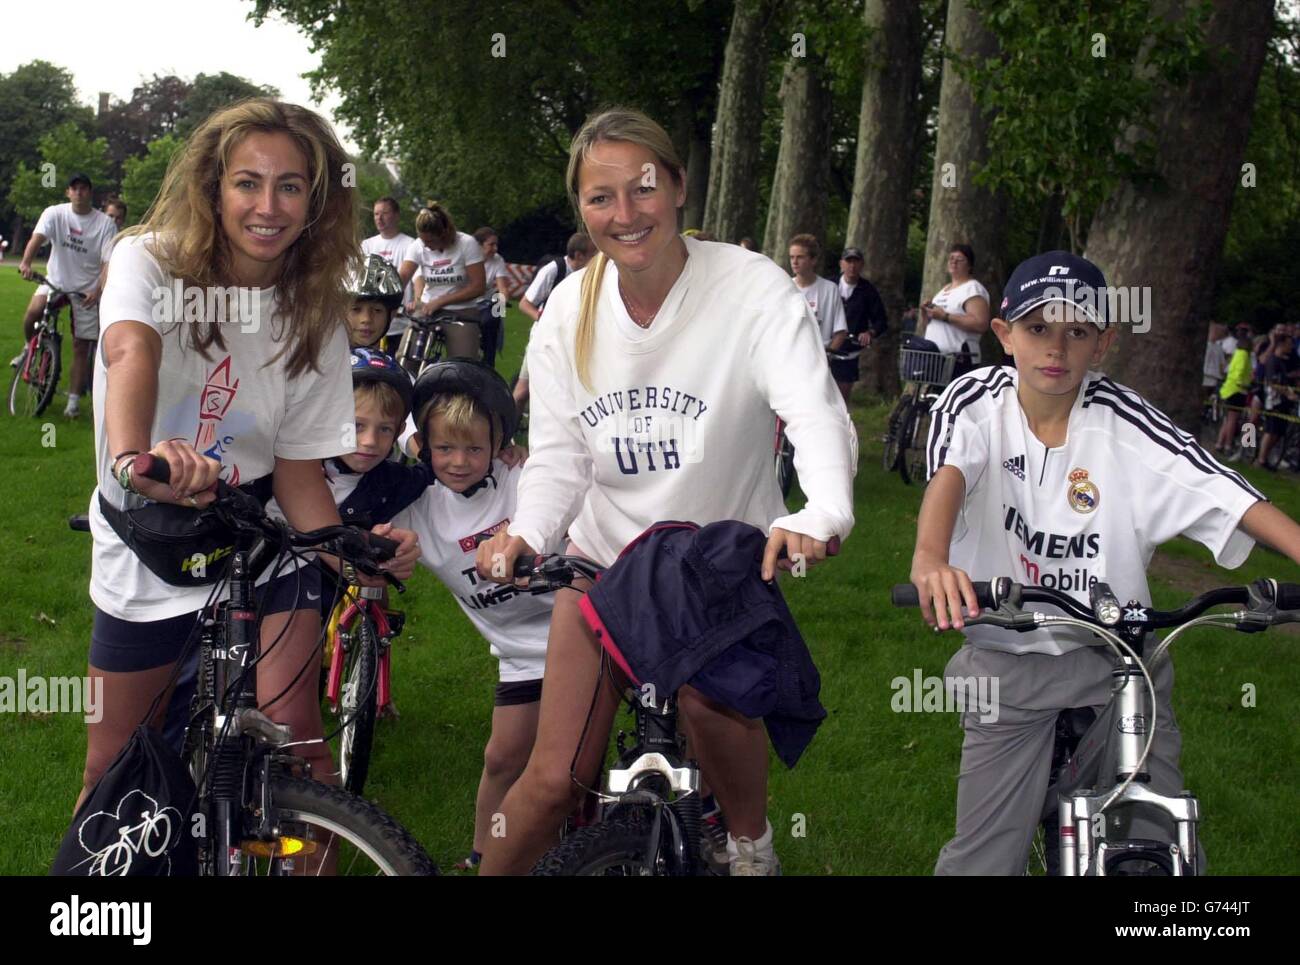 A charity bike a thon in London in aid of Leukaemia research. With Michelle Lineker and her sons Angus (on her bike), Tobias on his bike and George (far right) and Ali Cockayne and her son Henry. Stock Photo